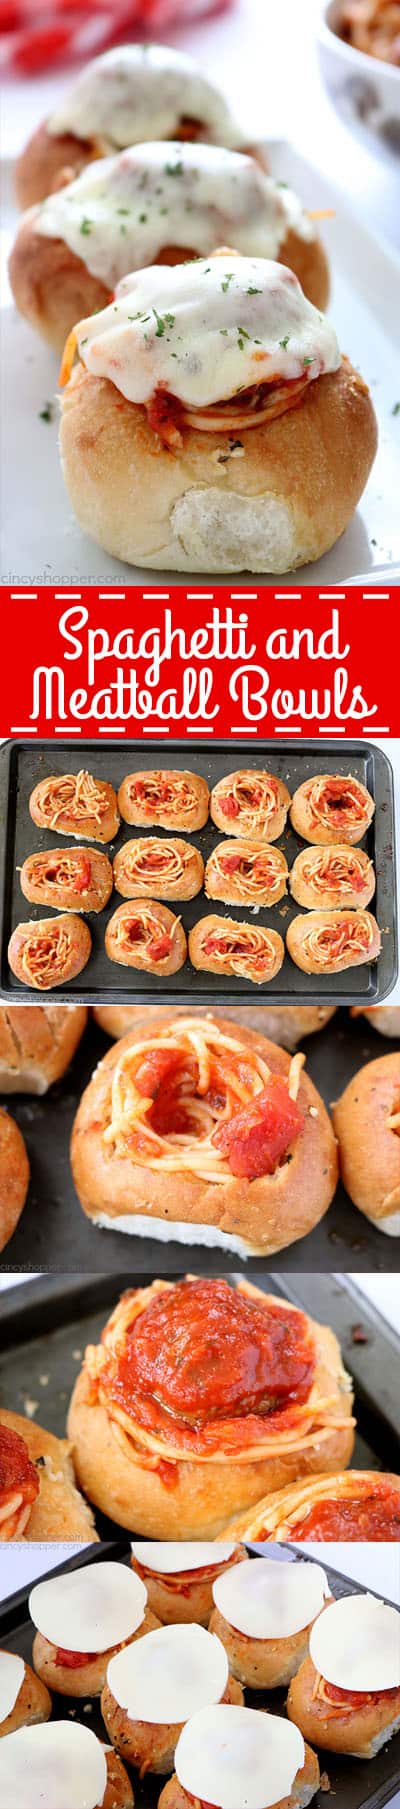 Looking to use that leftover spaghetti? Go ahead and make these delicious Spaghetti and Meatball bowls for an additional dinner or make them as a party food. So super simple to make.